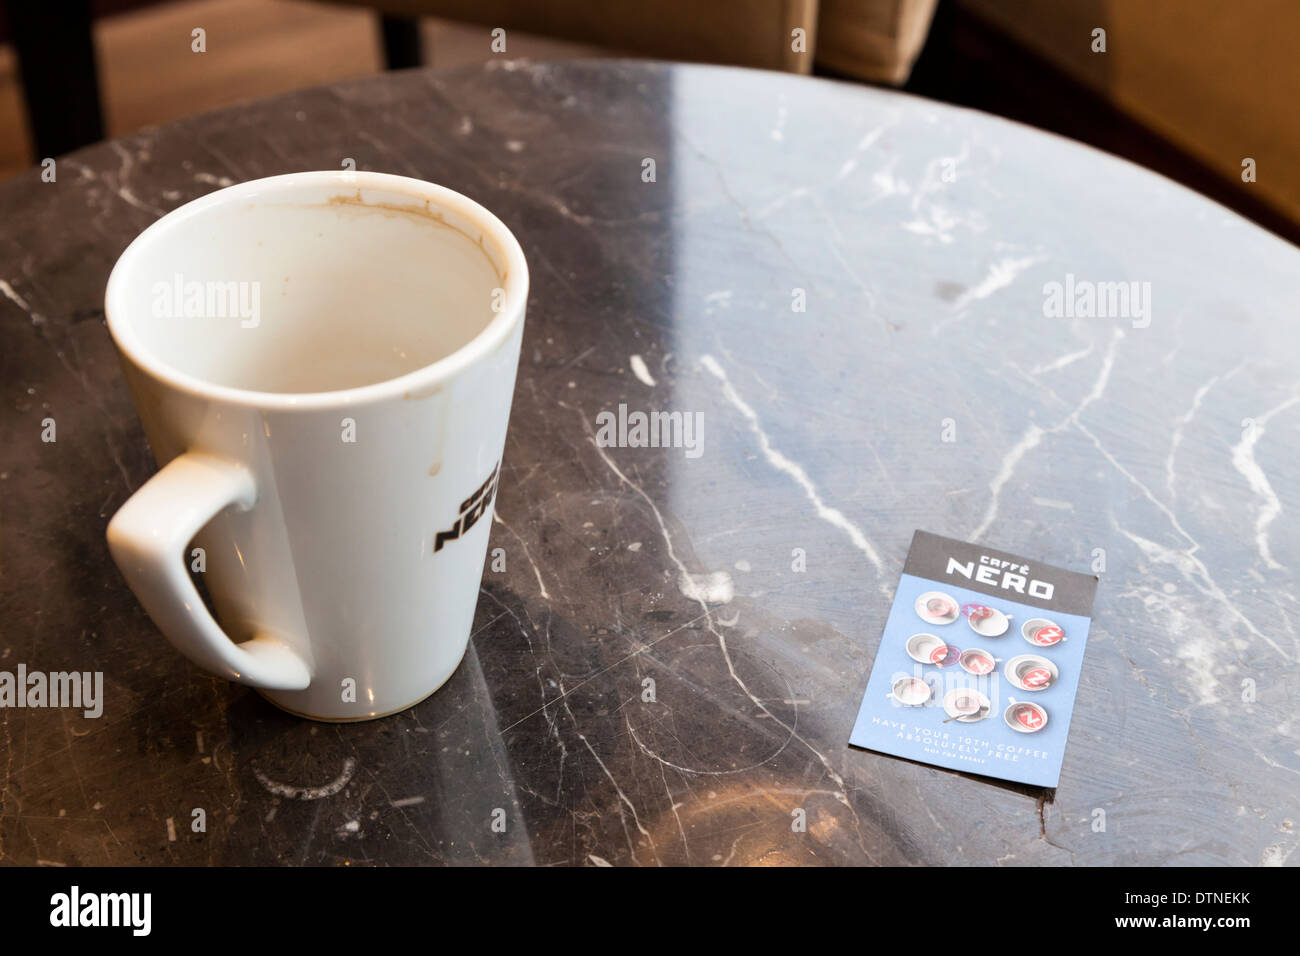 https://c8.alamy.com/comp/DTNEKK/full-card-caffe-nero-loyalty-card-with-all-stamps-filled-in-for-a-DTNEKK.jpg